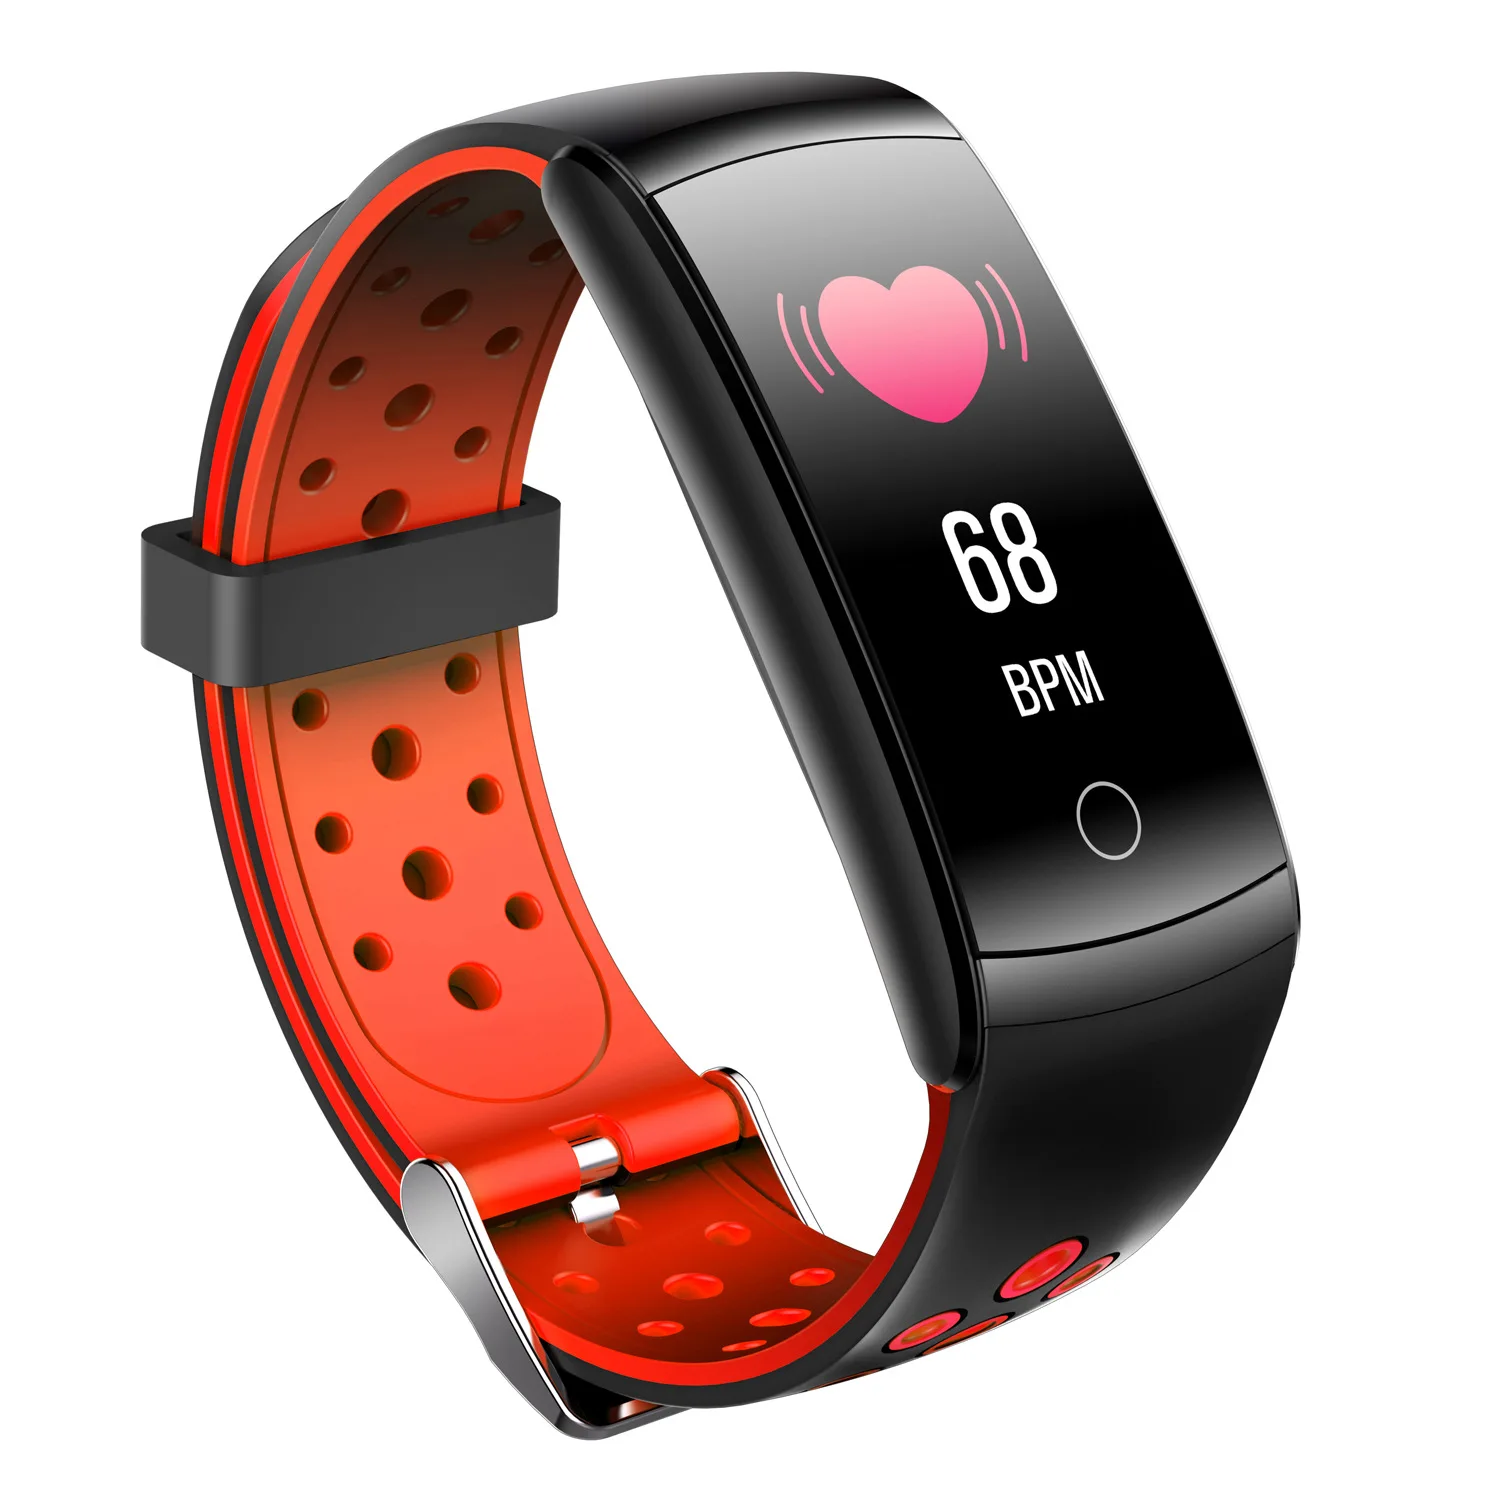 

Q8T waterproof smartwatch, sports smartwatch with heart rate and temperature monitoring